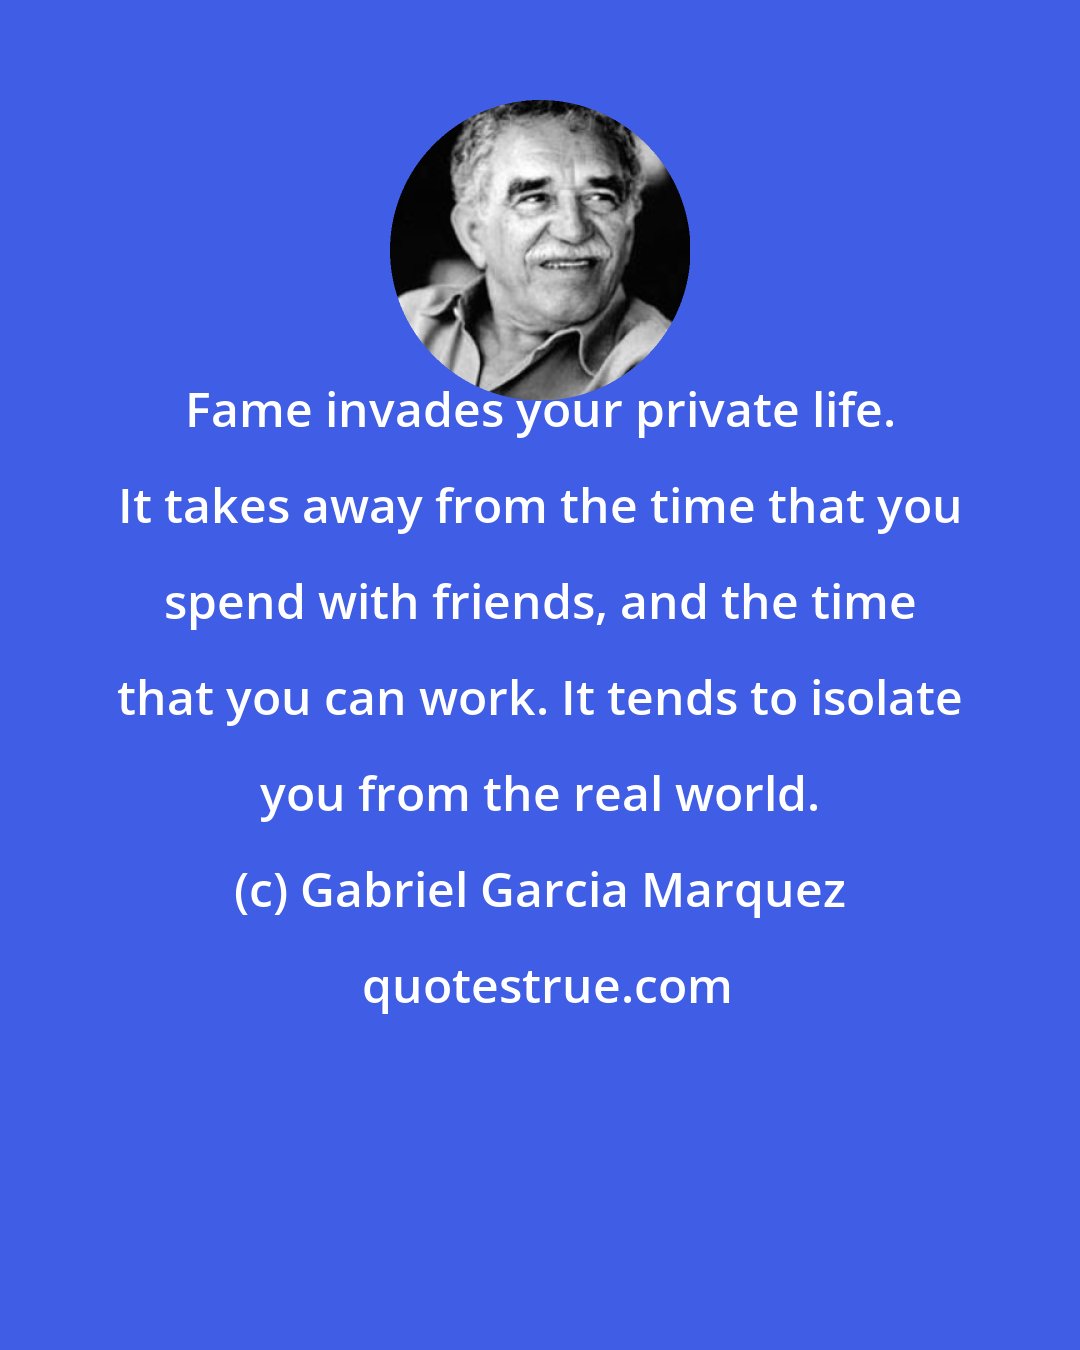 Gabriel Garcia Marquez: Fame invades your private life. It takes away from the time that you spend with friends, and the time that you can work. It tends to isolate you from the real world.